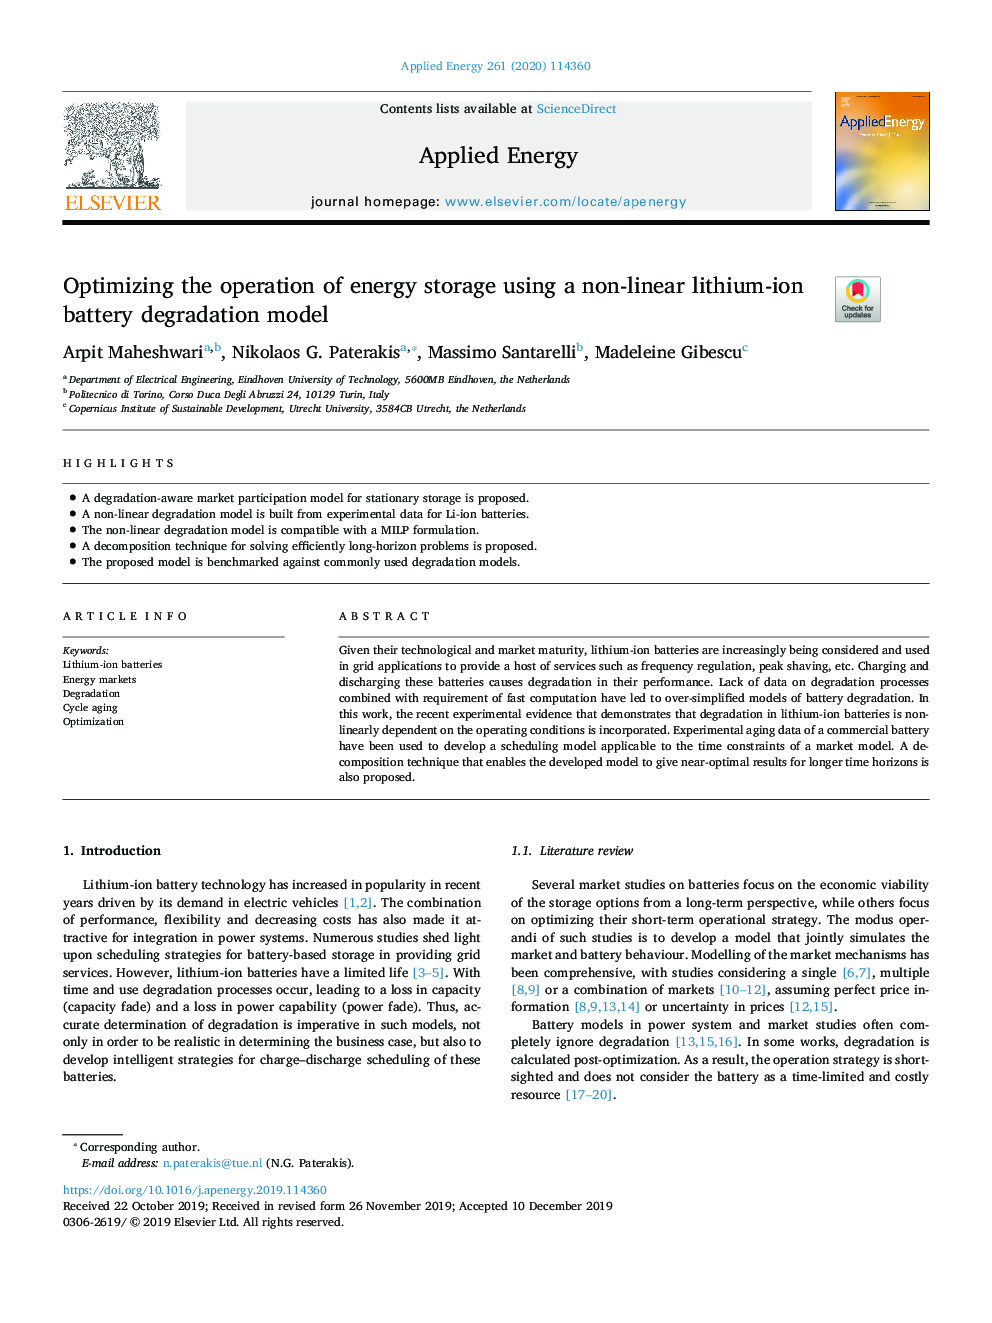 Optimizing the operation of energy storage using a non-linear lithium-ion battery degradation model